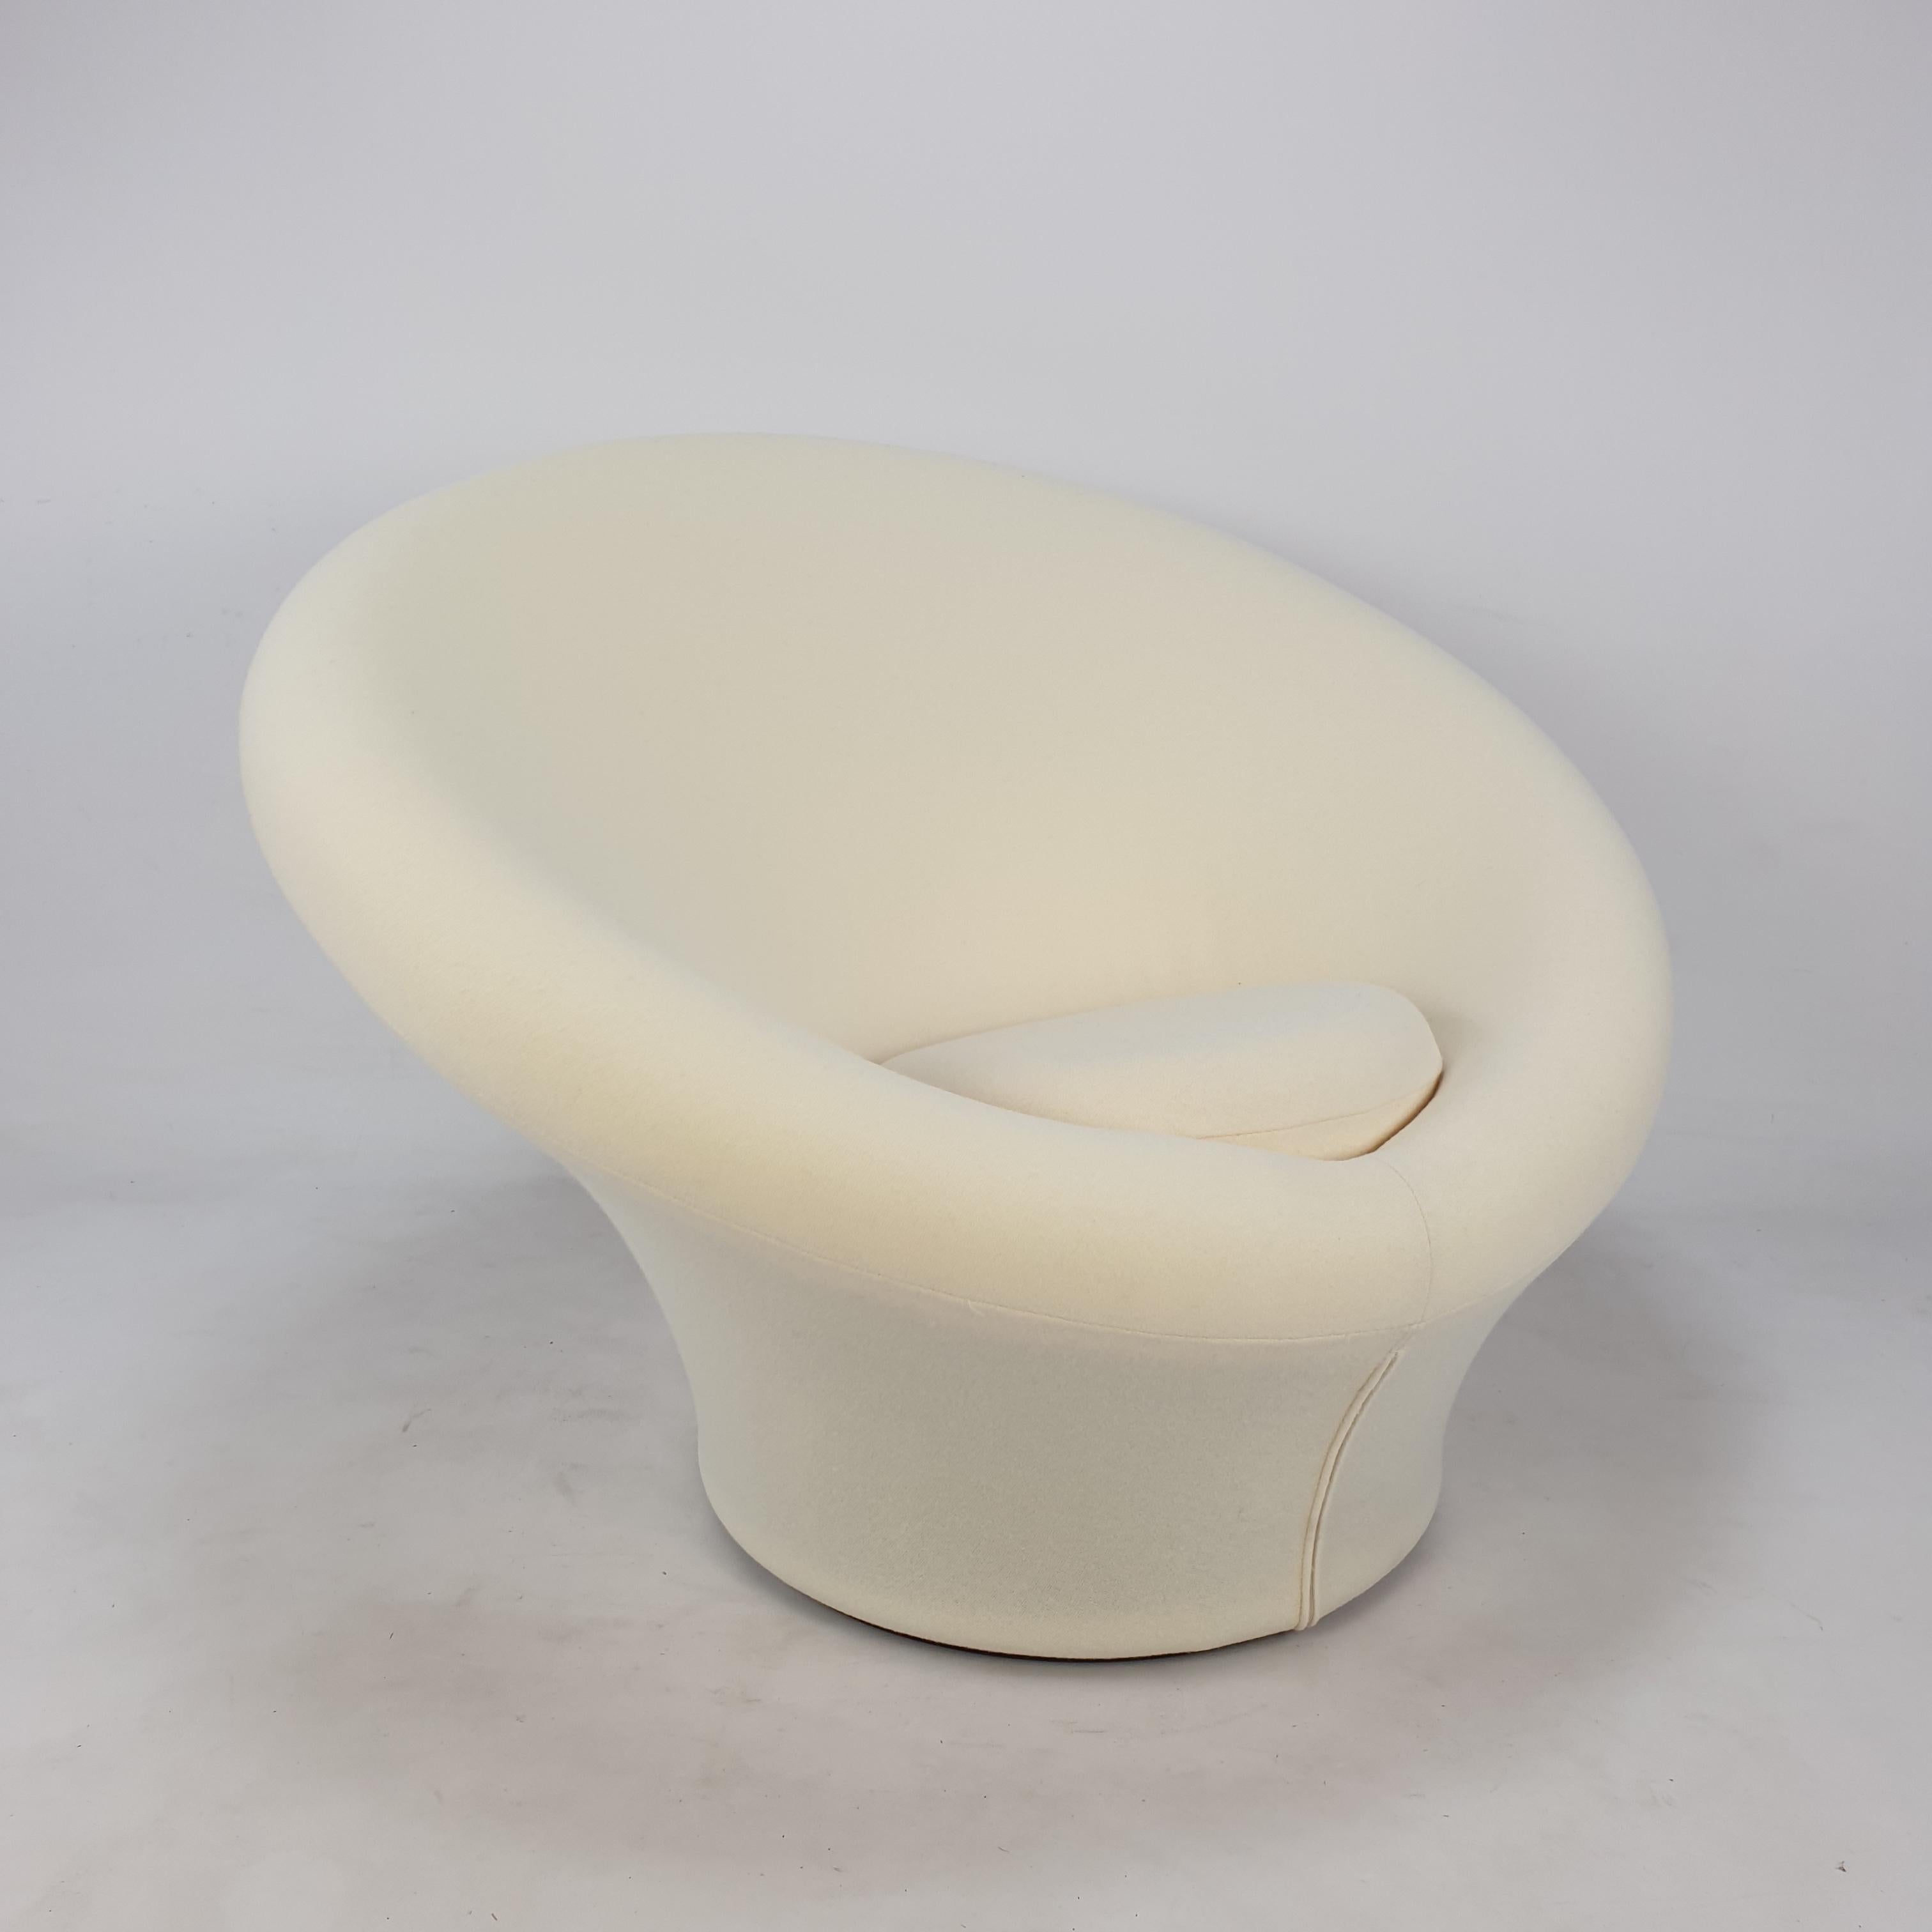 Extremely comfortable and cosy Artifort big mushroom chair, designed by Pierre Paulin in the 60's. This lovely chair is covered with the original Kvadrat Tonus wool fabric, color 0100 (white). It is a new chair, so it is in perfect condition.